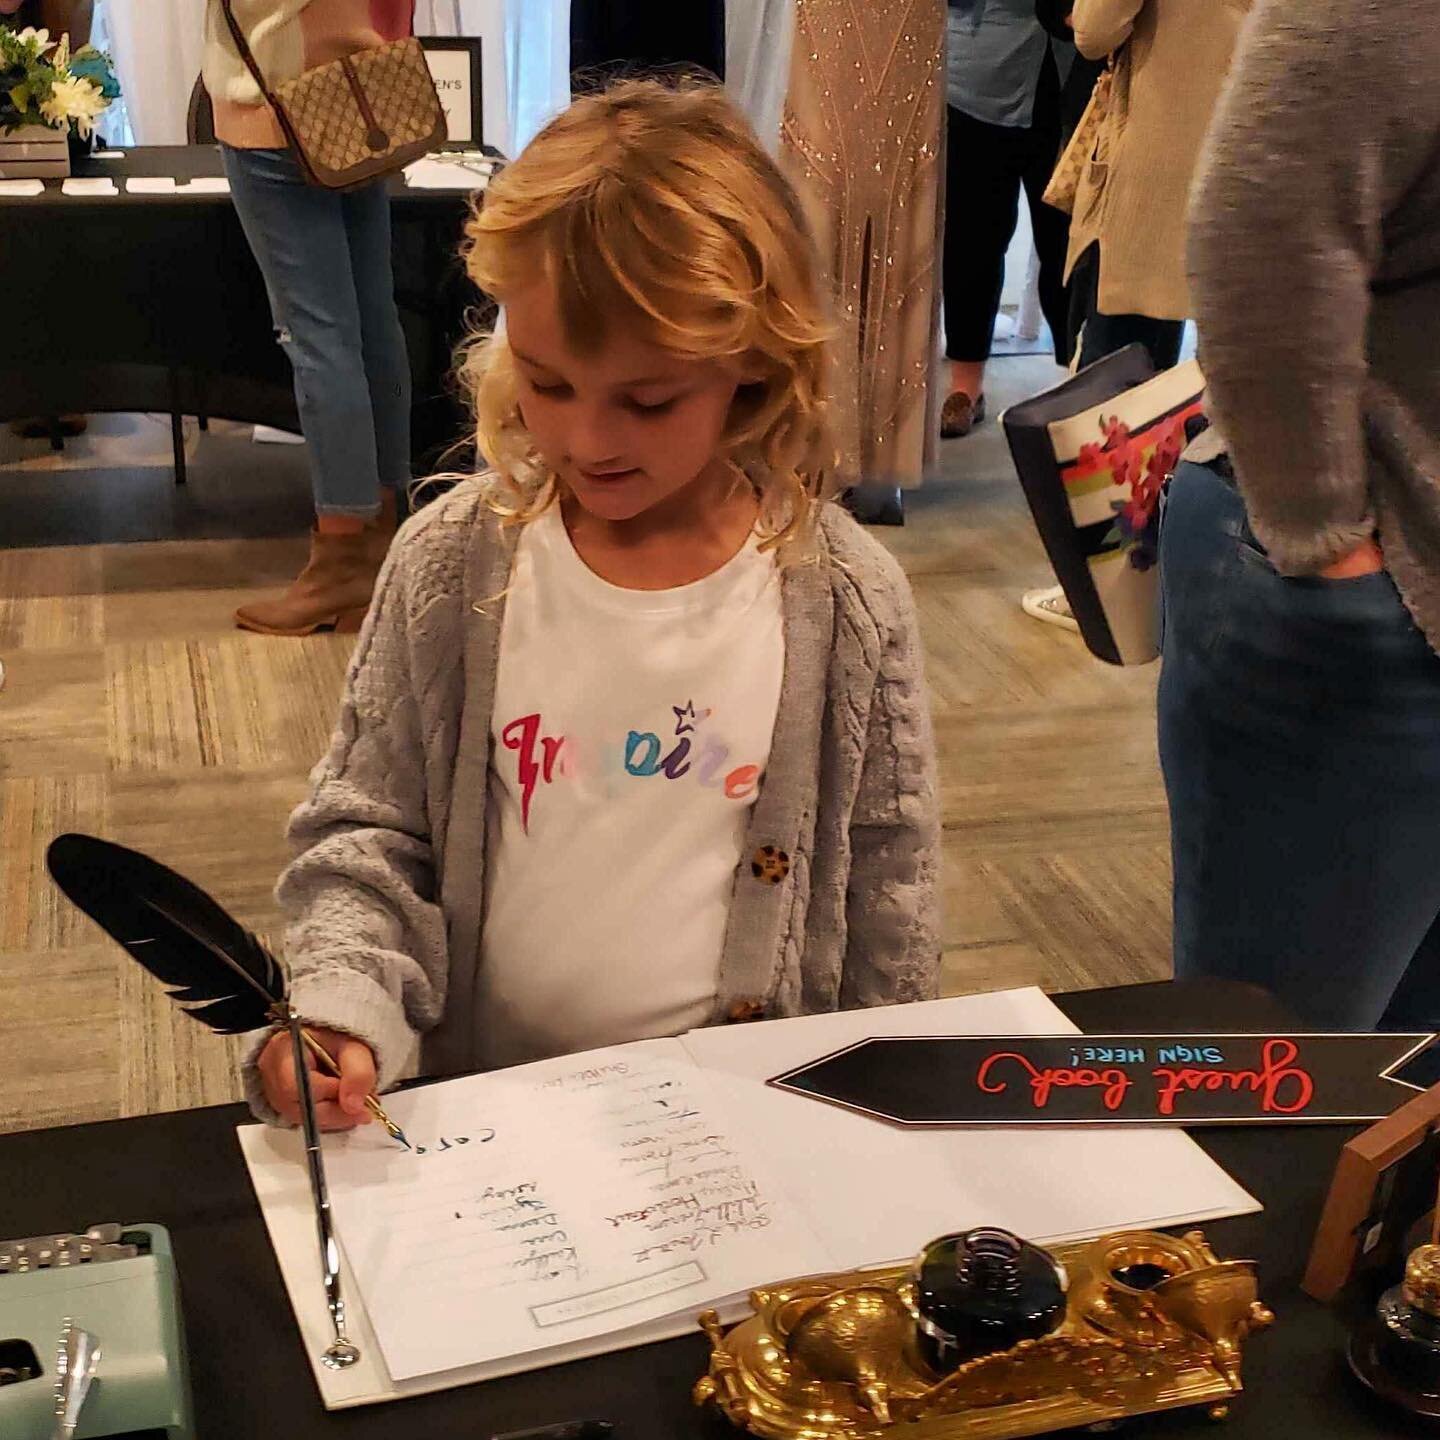 With permission from the parents, we wanted to share how good it is for people of all ages to share in Our Type Love&mdash; the transgenerational wonder and joy is why we love doing this work; so, thank you!

Photo credit: @mrs.heather.reichert